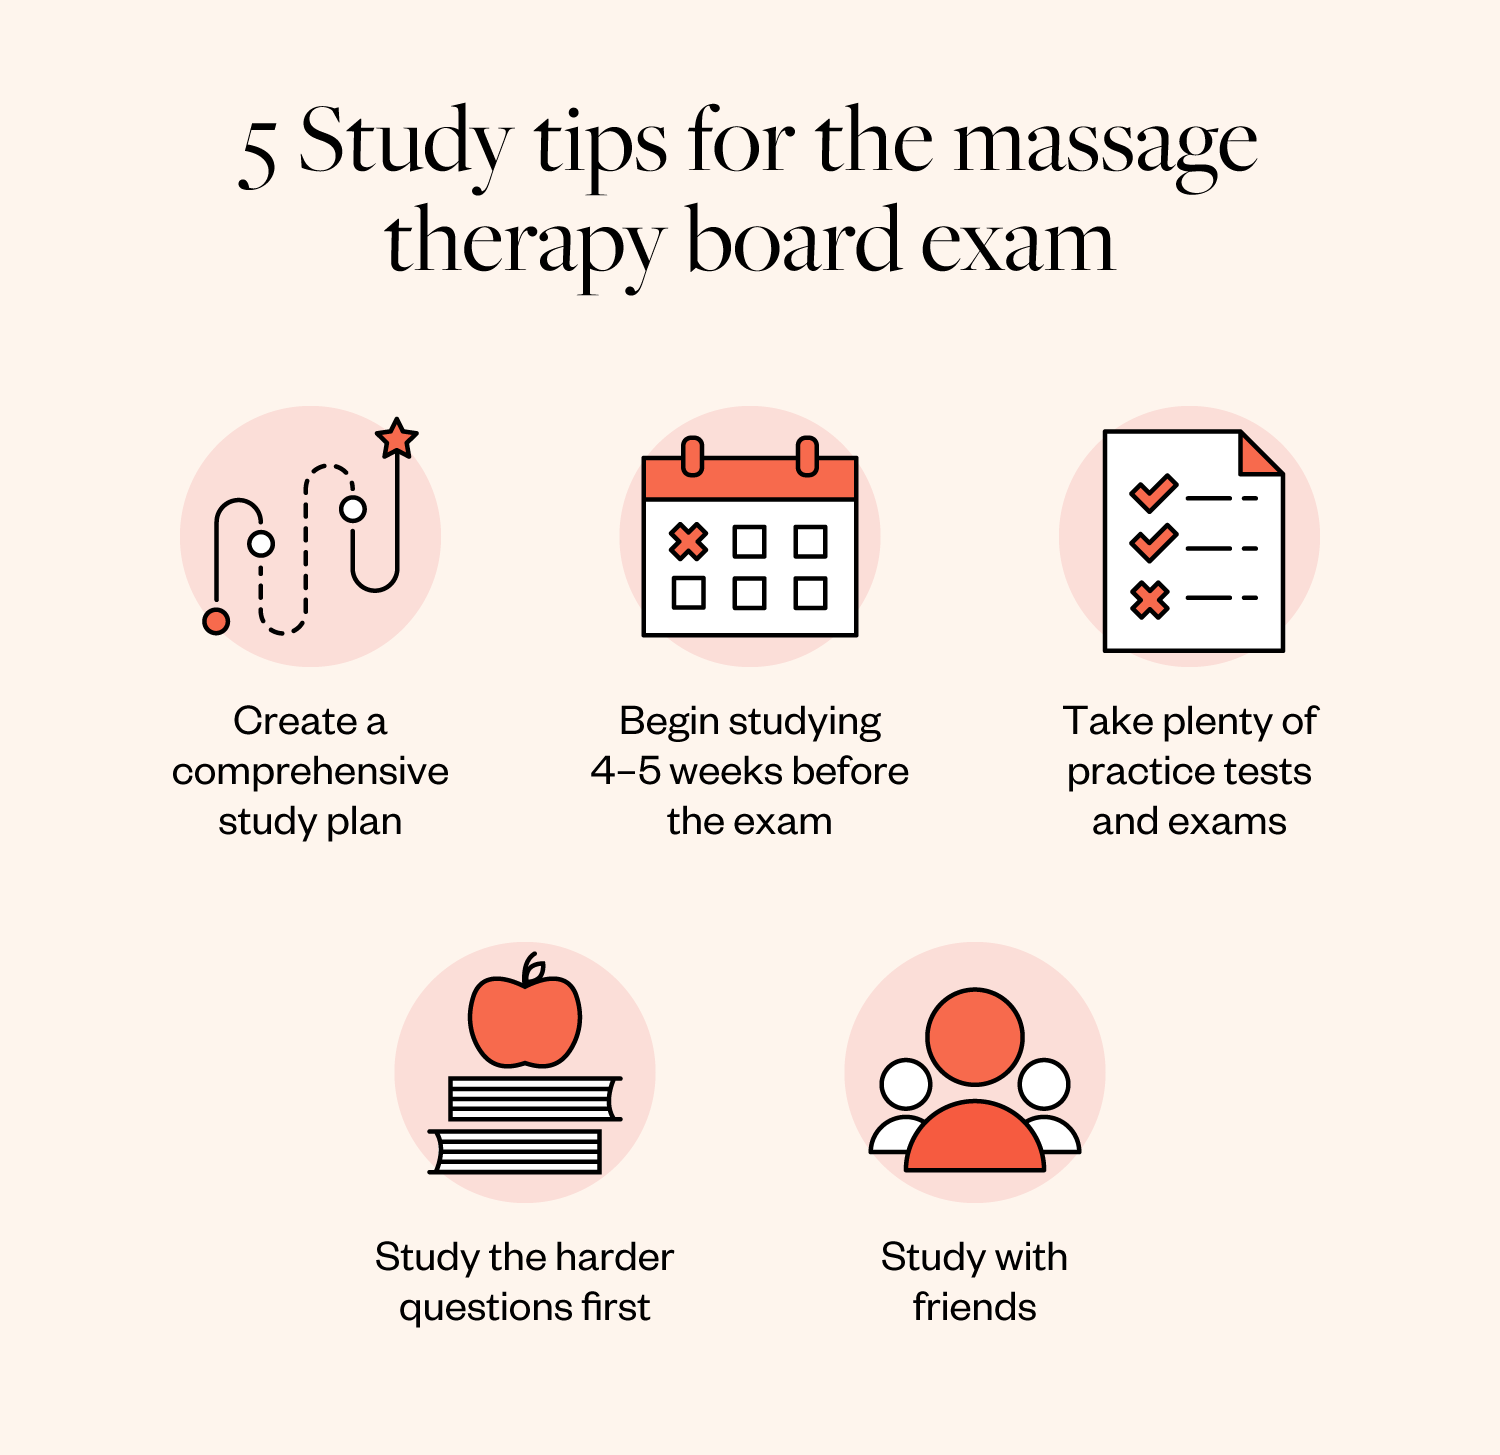 5 study tips for the massage therapy board exam